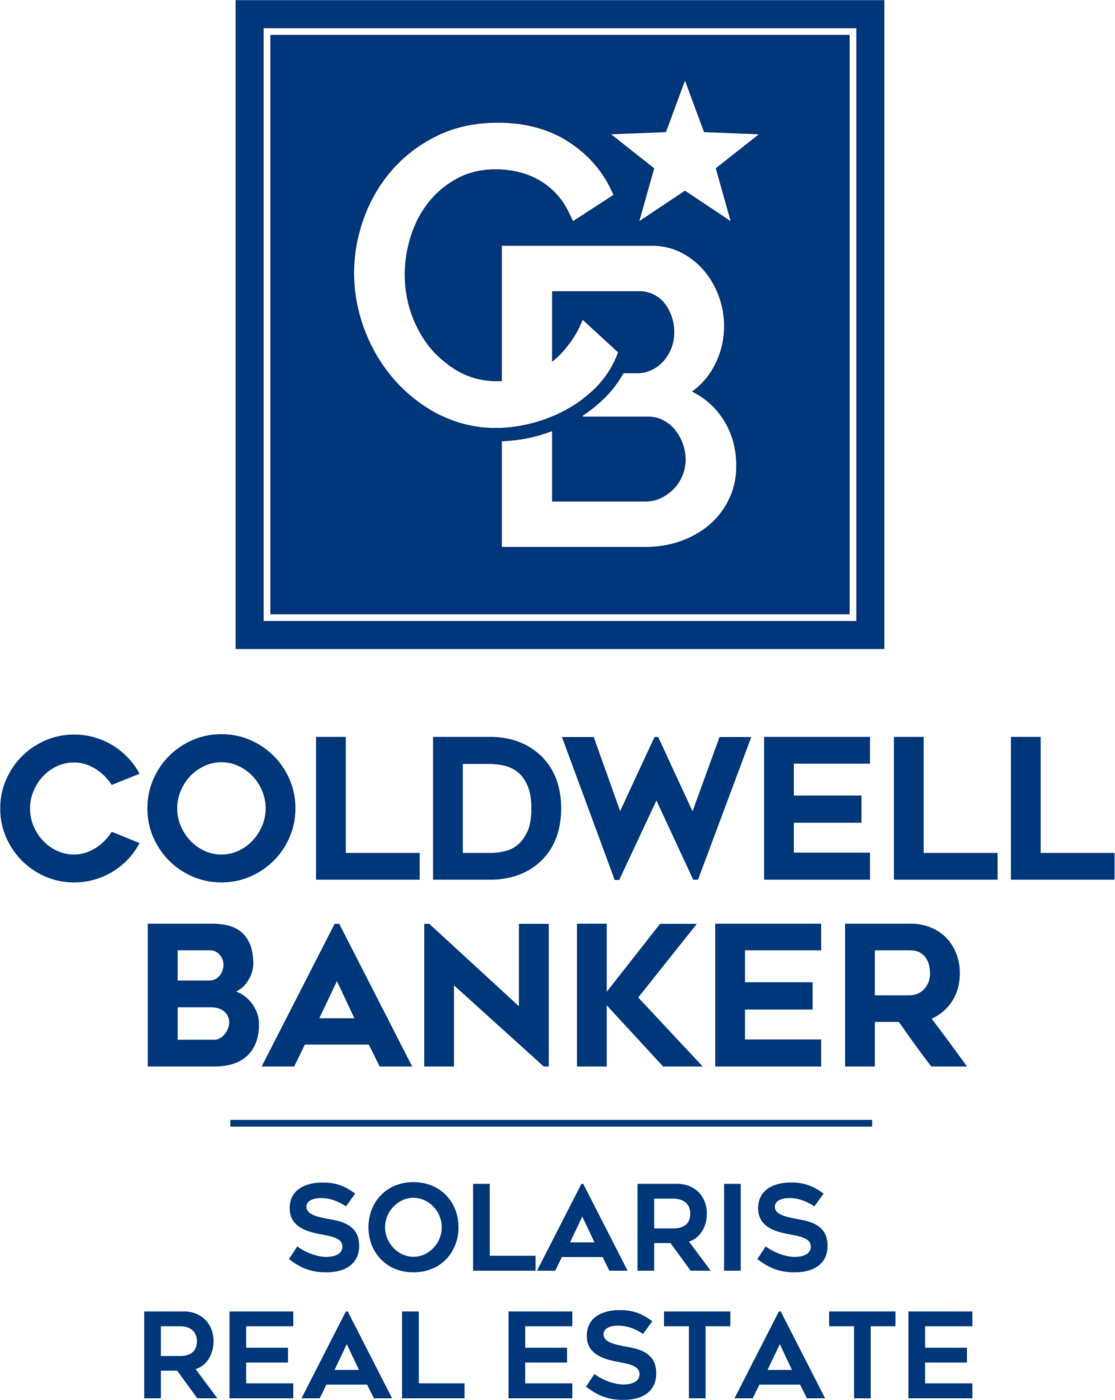 Coldwell Banker Solaris Real Estate